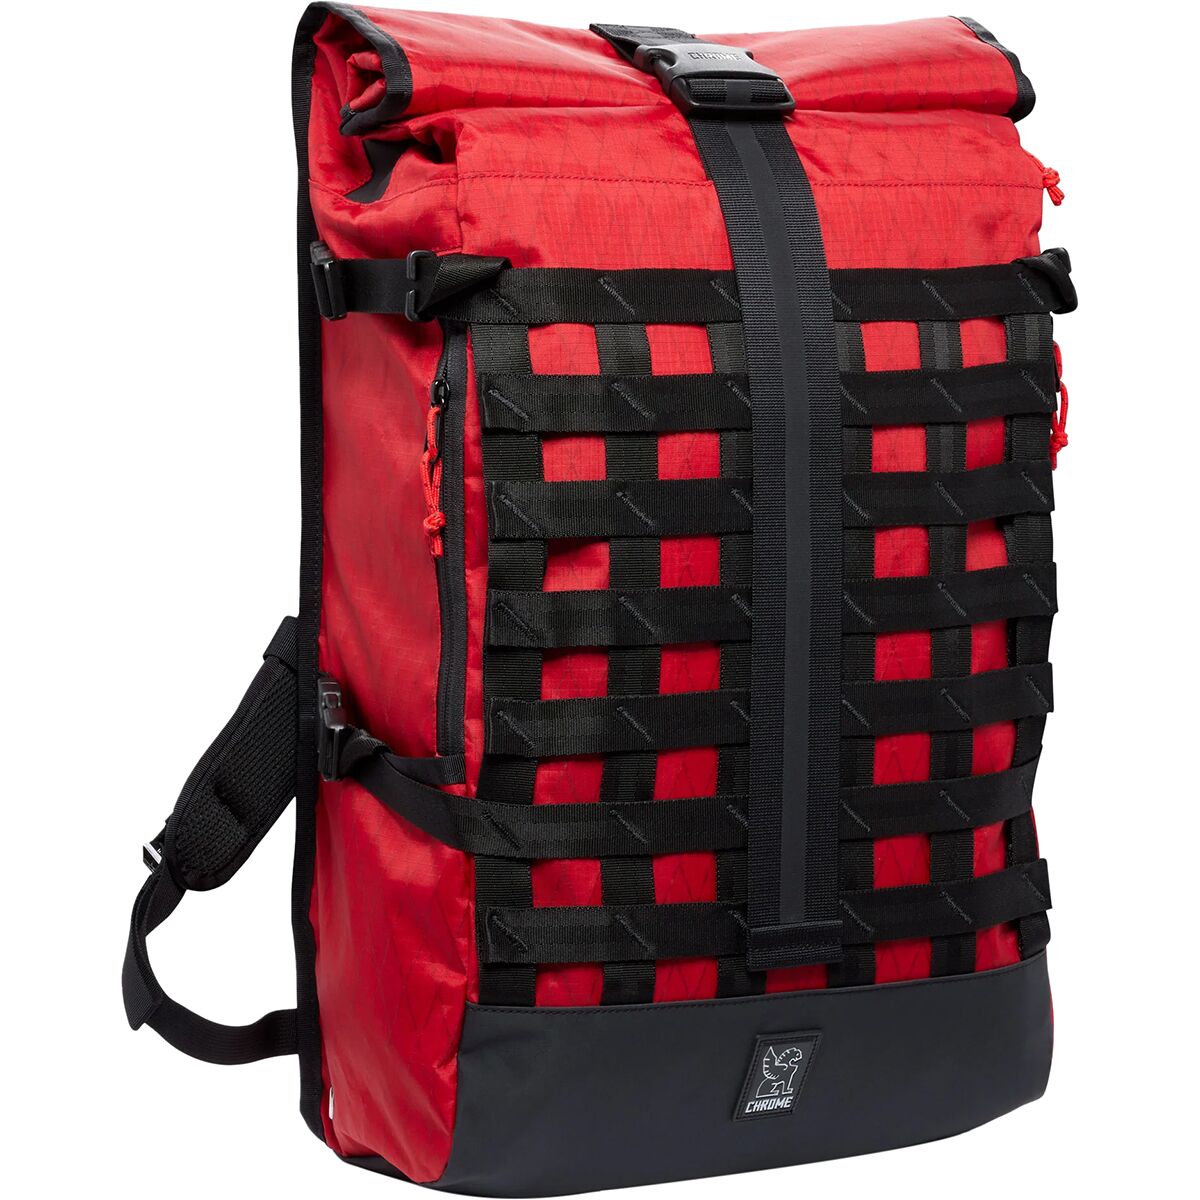 Chrome Barrage Freight Backpack